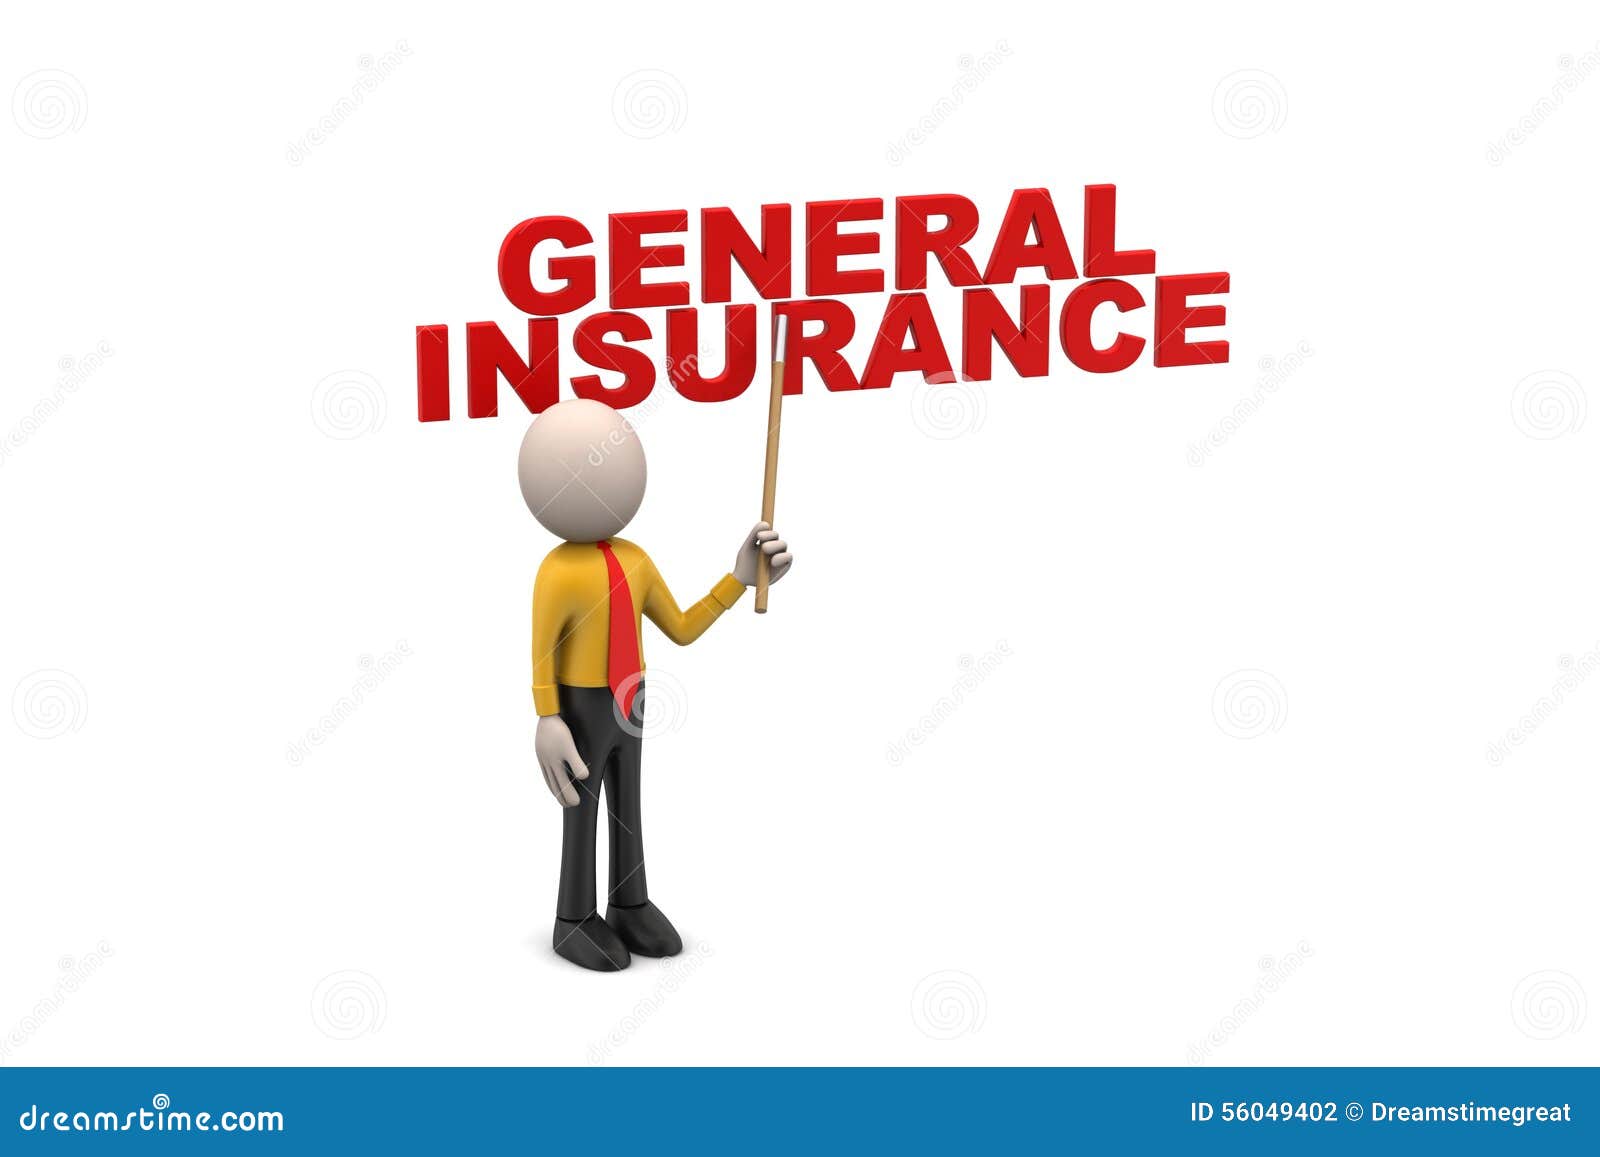 3d Man With General Insurance Text Stock Illustration - Image: 56049402